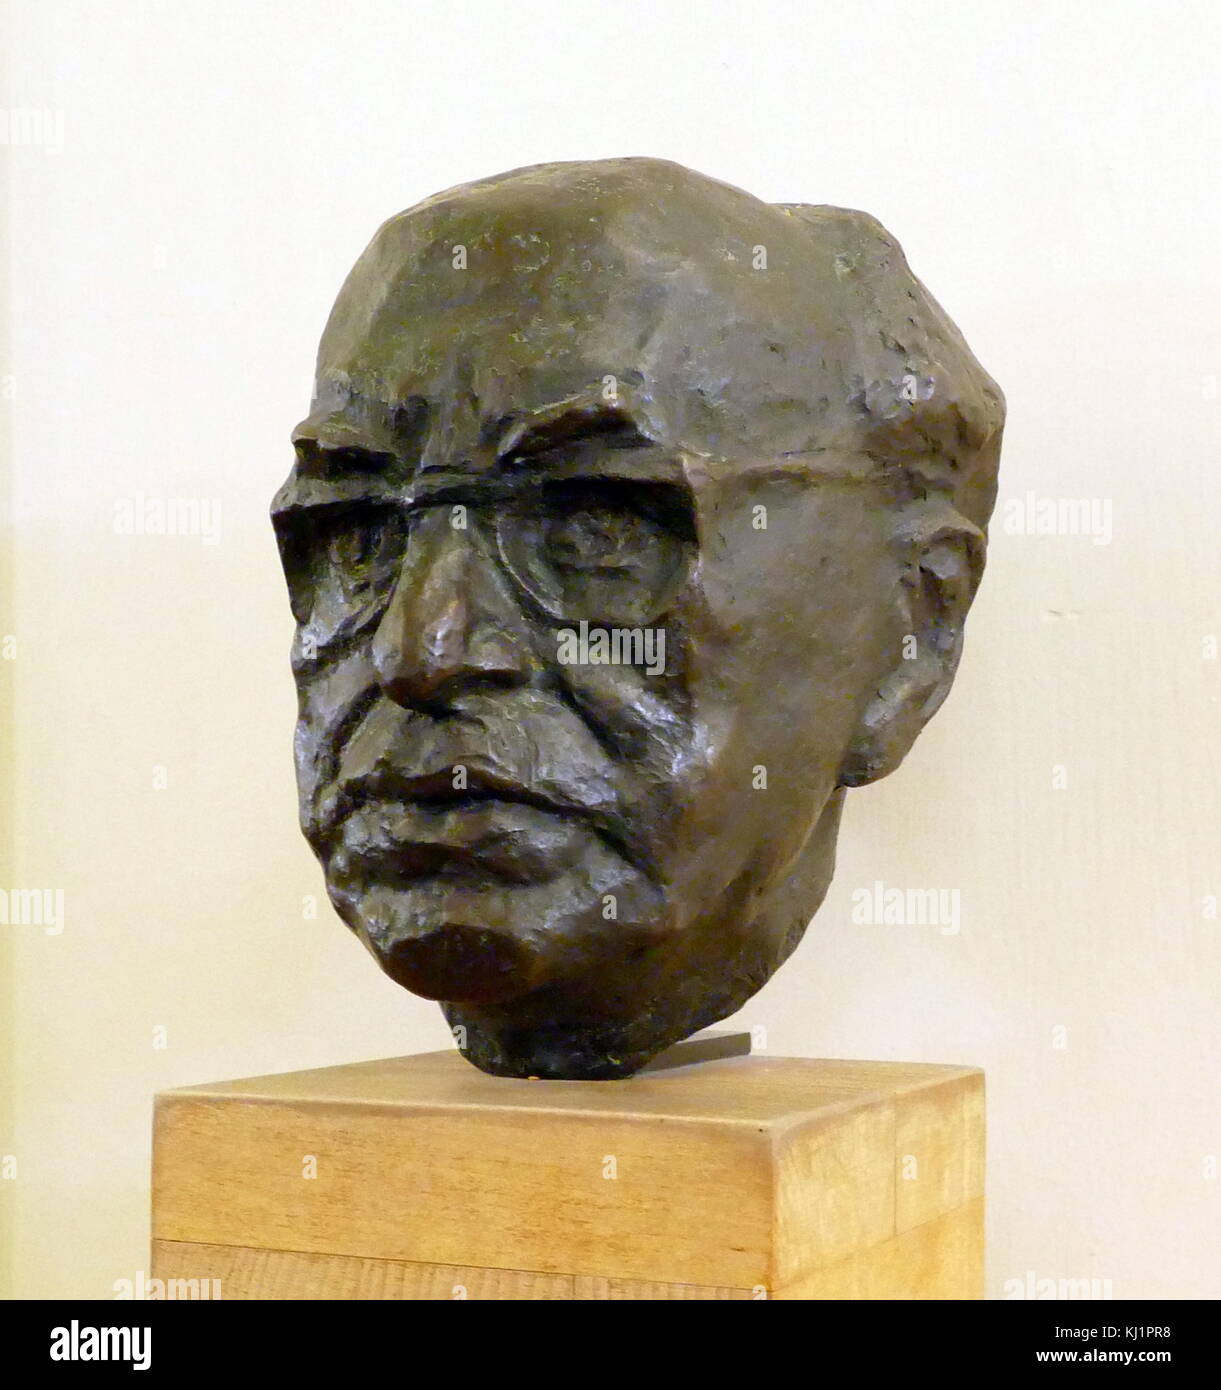 1963 Bust depicting Zalman Shazar; Israeli politician, author and poet. Shazar served as the third President of Israel from 1963 to 1973 Stock Photo